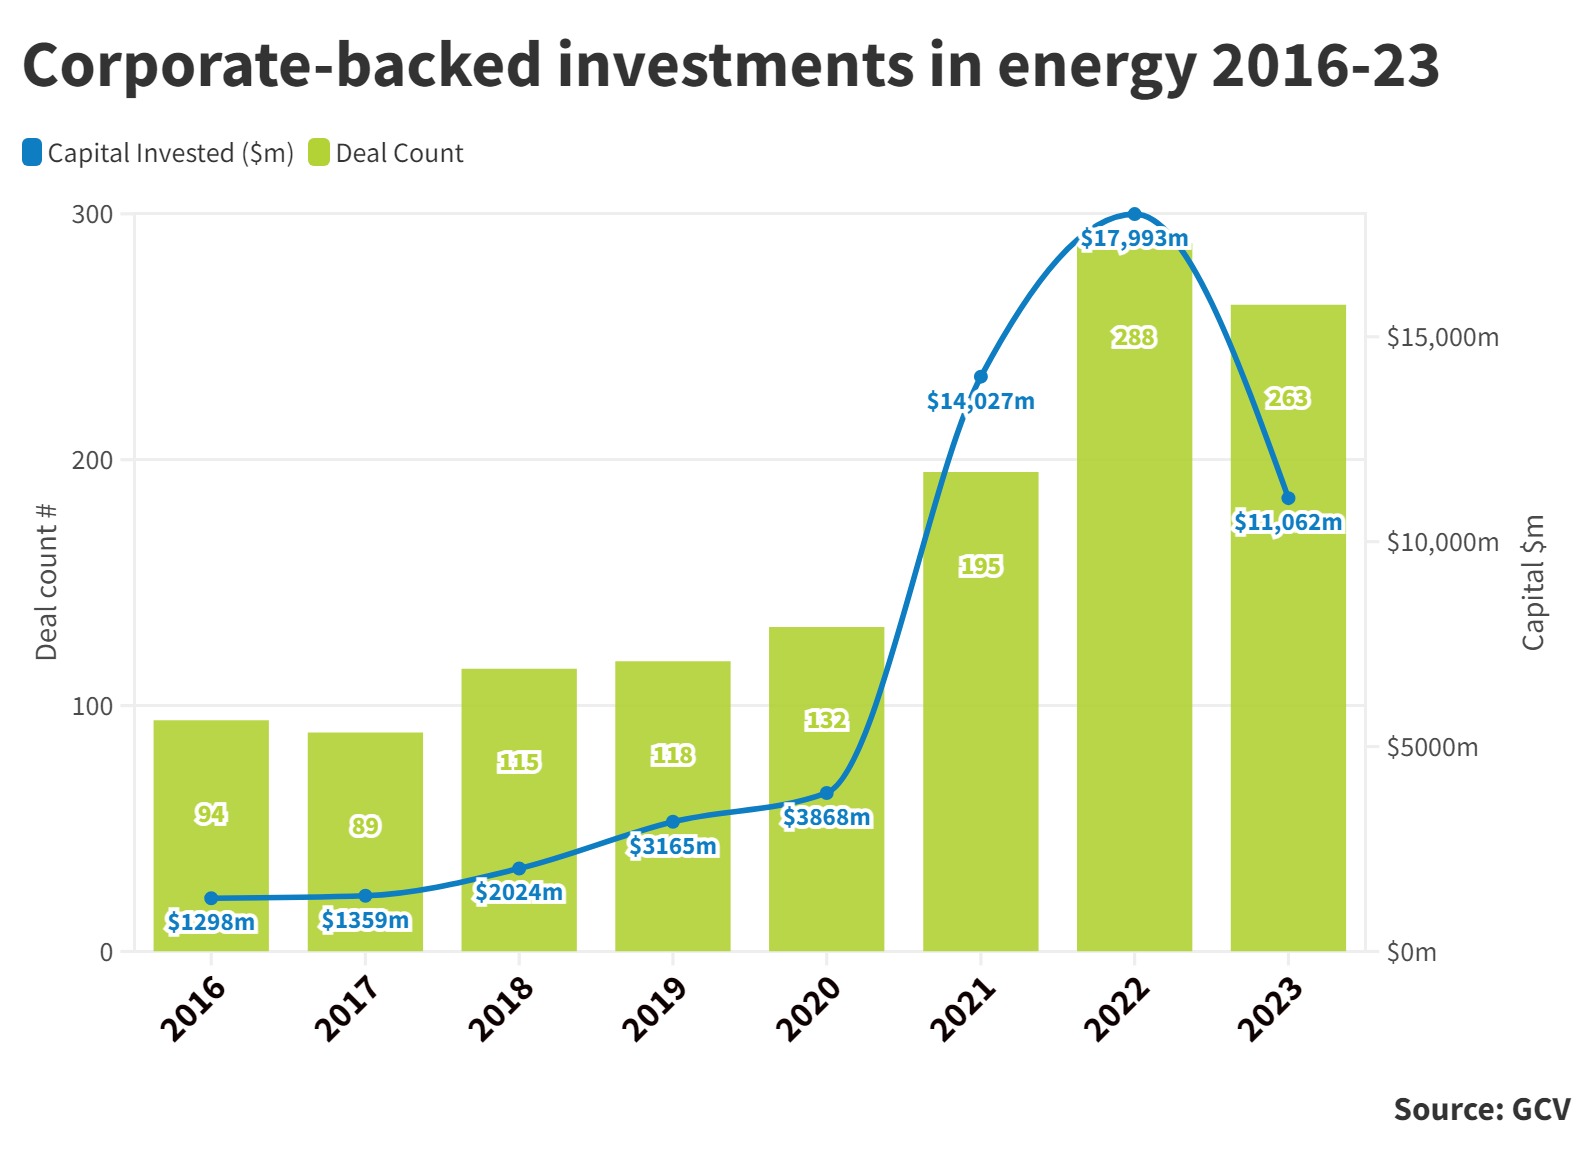 Corporate-backed investments in energy 2016-2023 (line and bar chart). Source: GCV